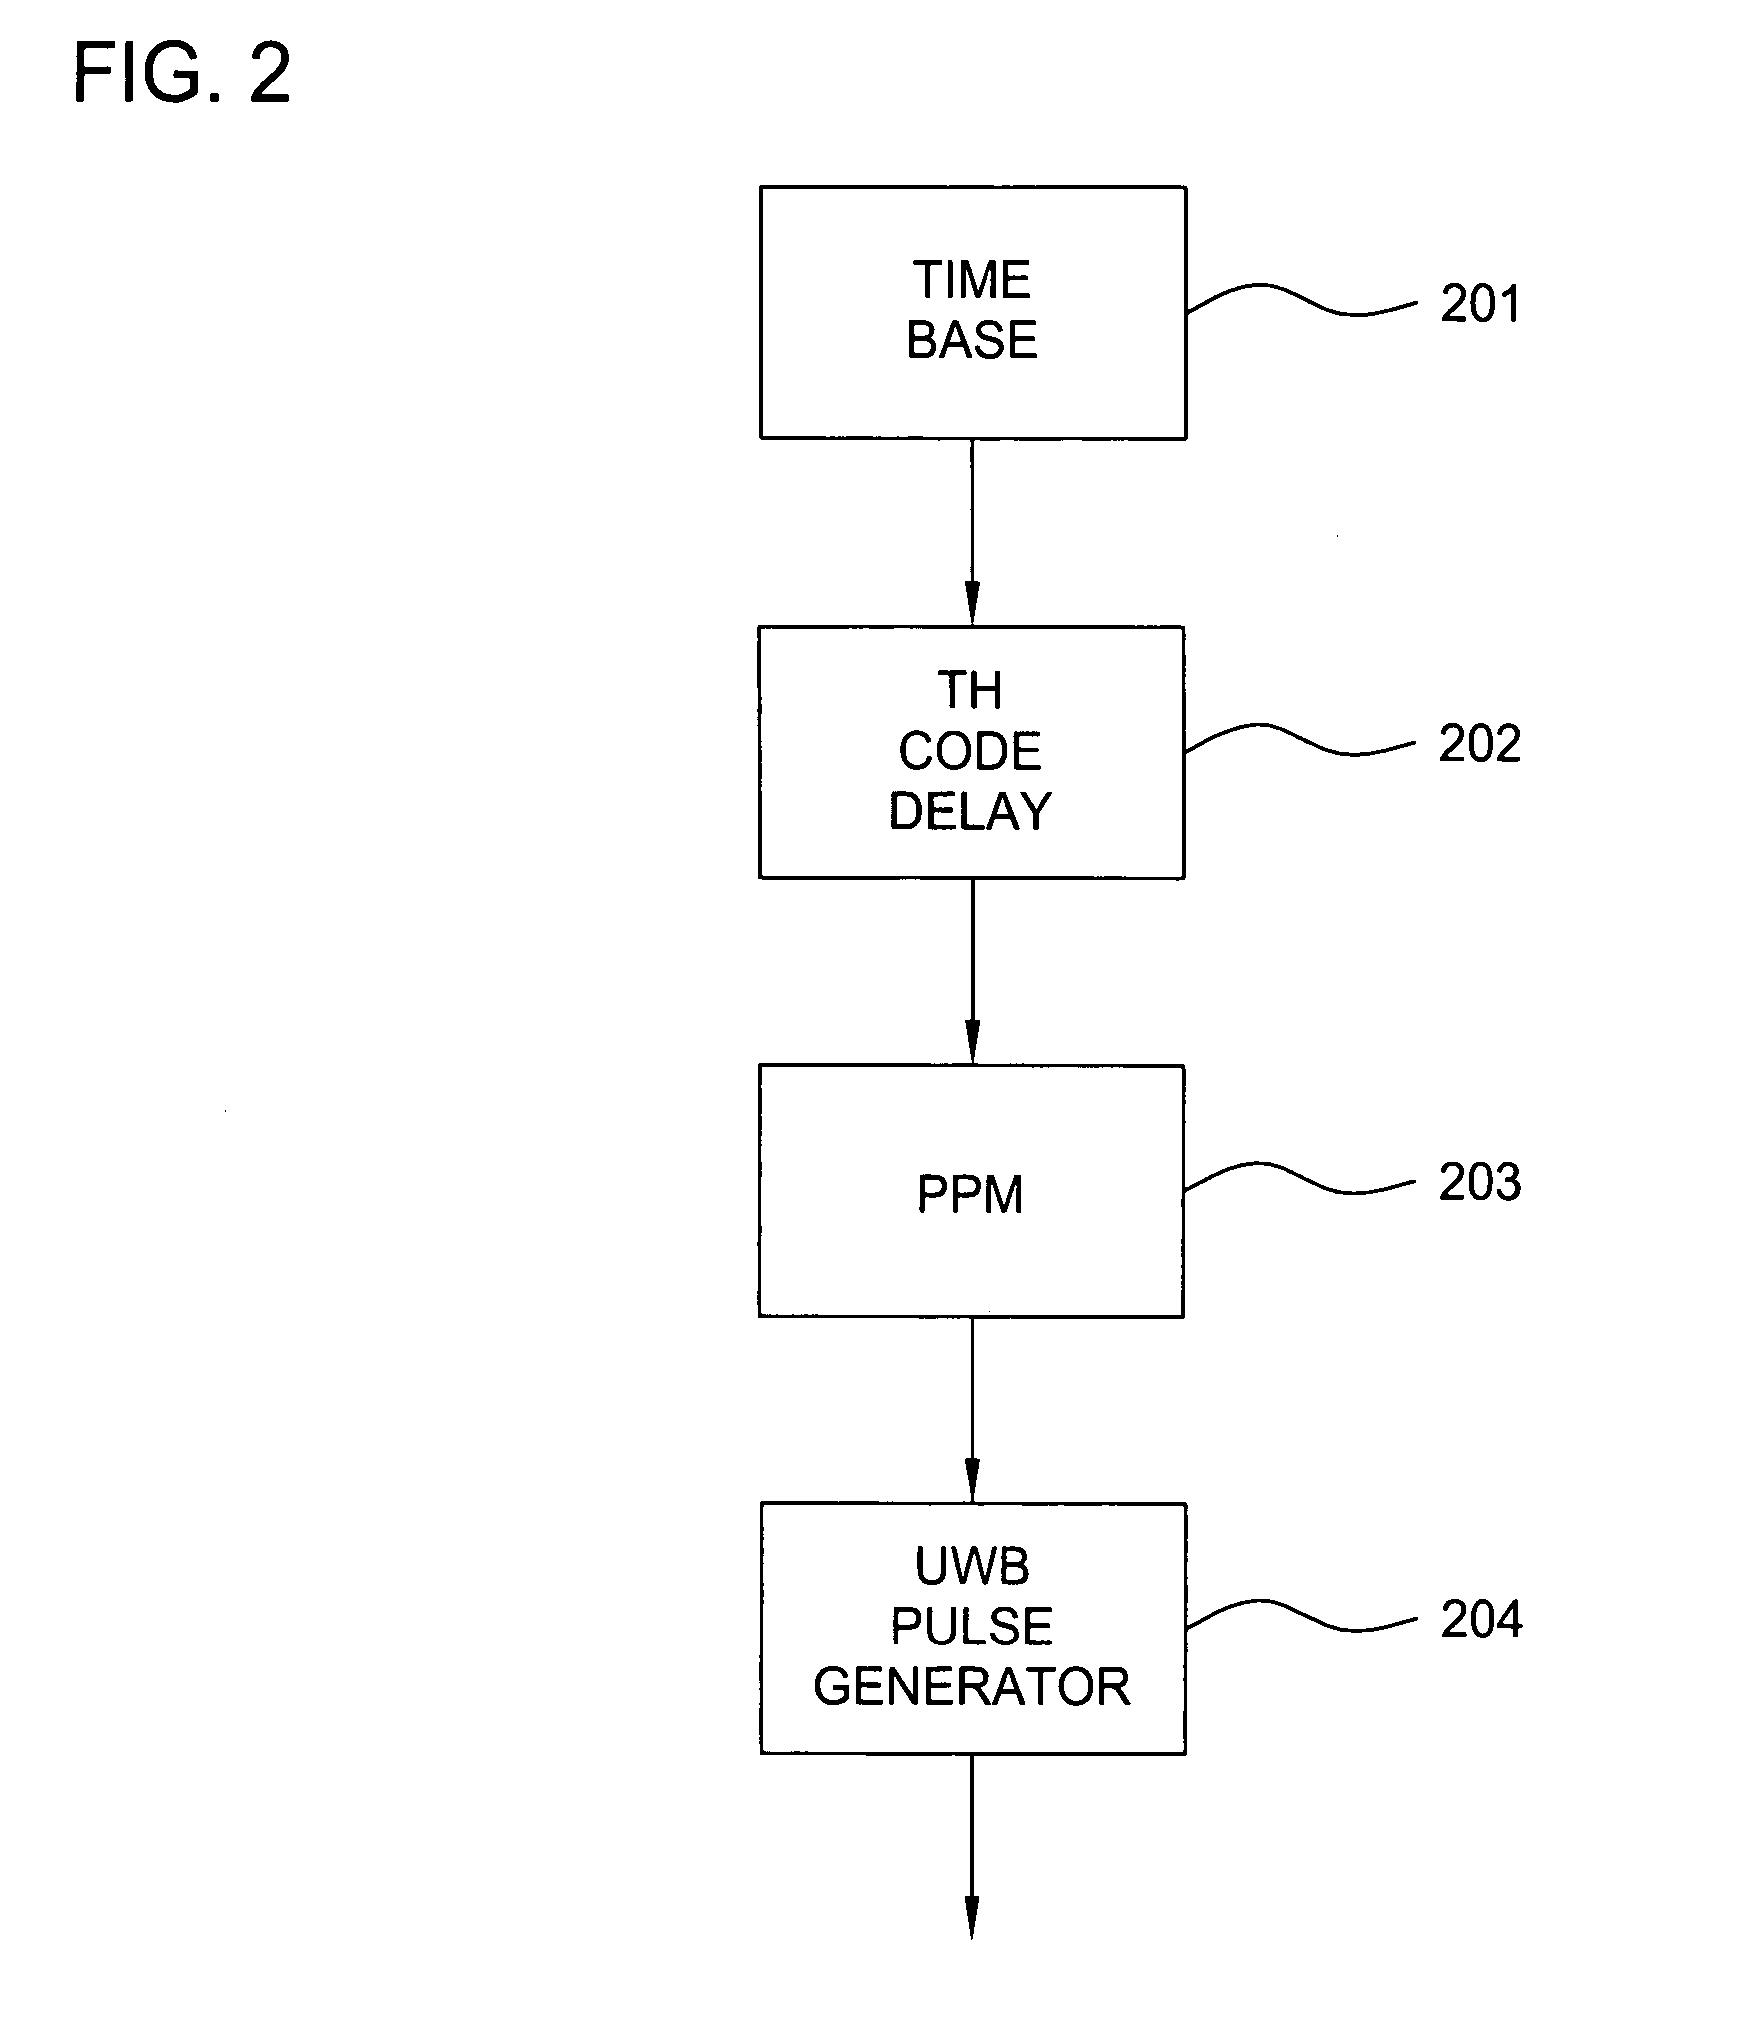 Dynamic differentiated link adaptation for ultra-wideband communication system